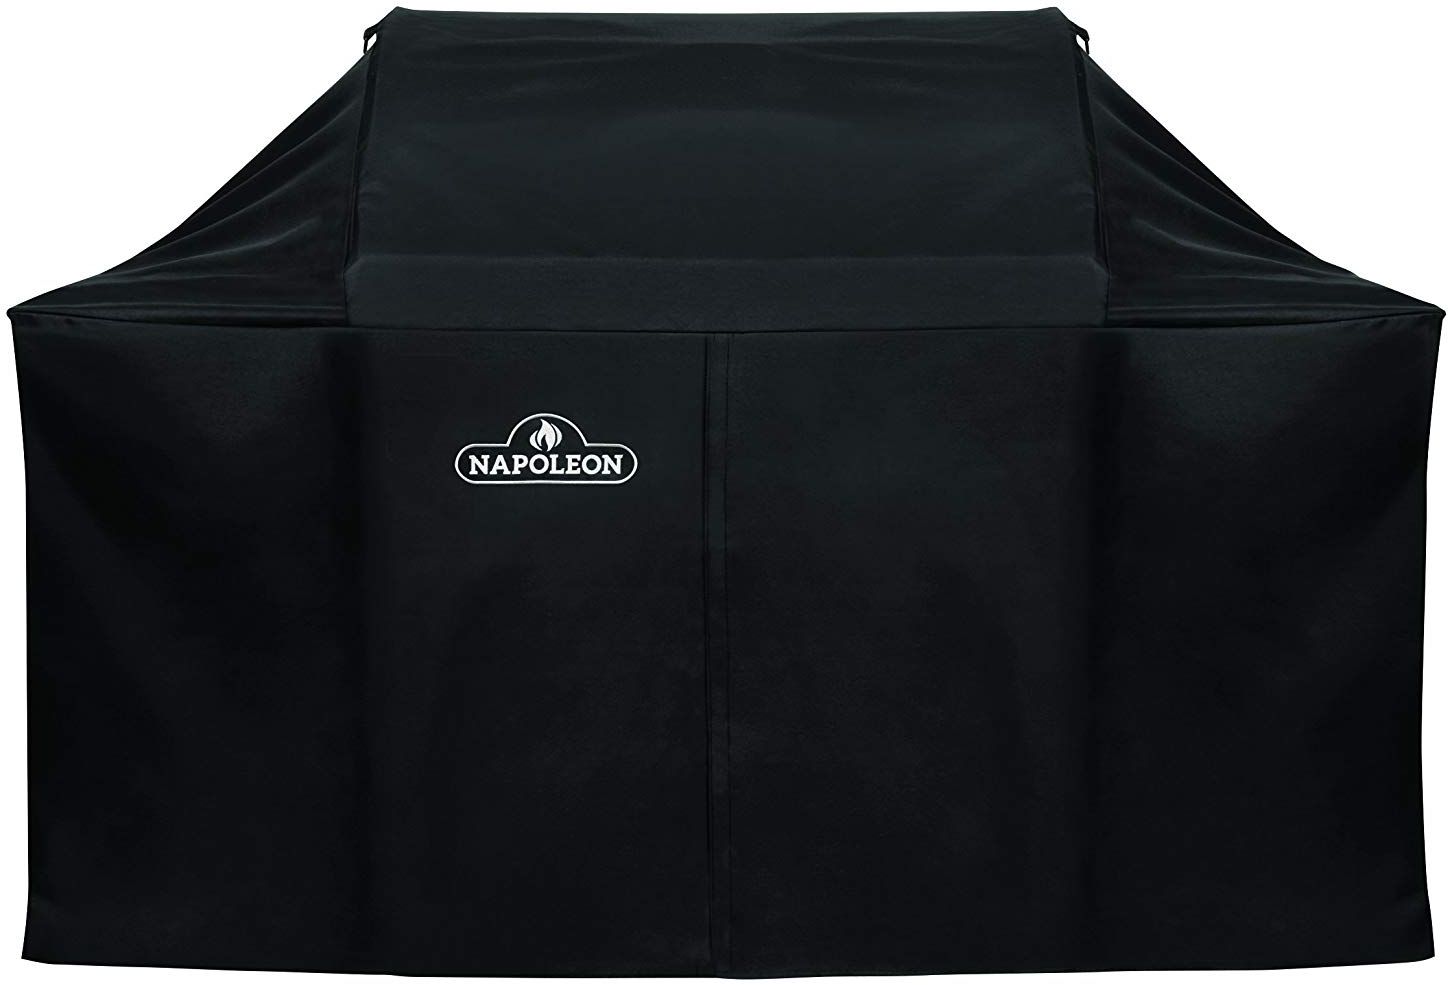 Napoleon LEX 605 Series Charcoal Professional Grill Cover